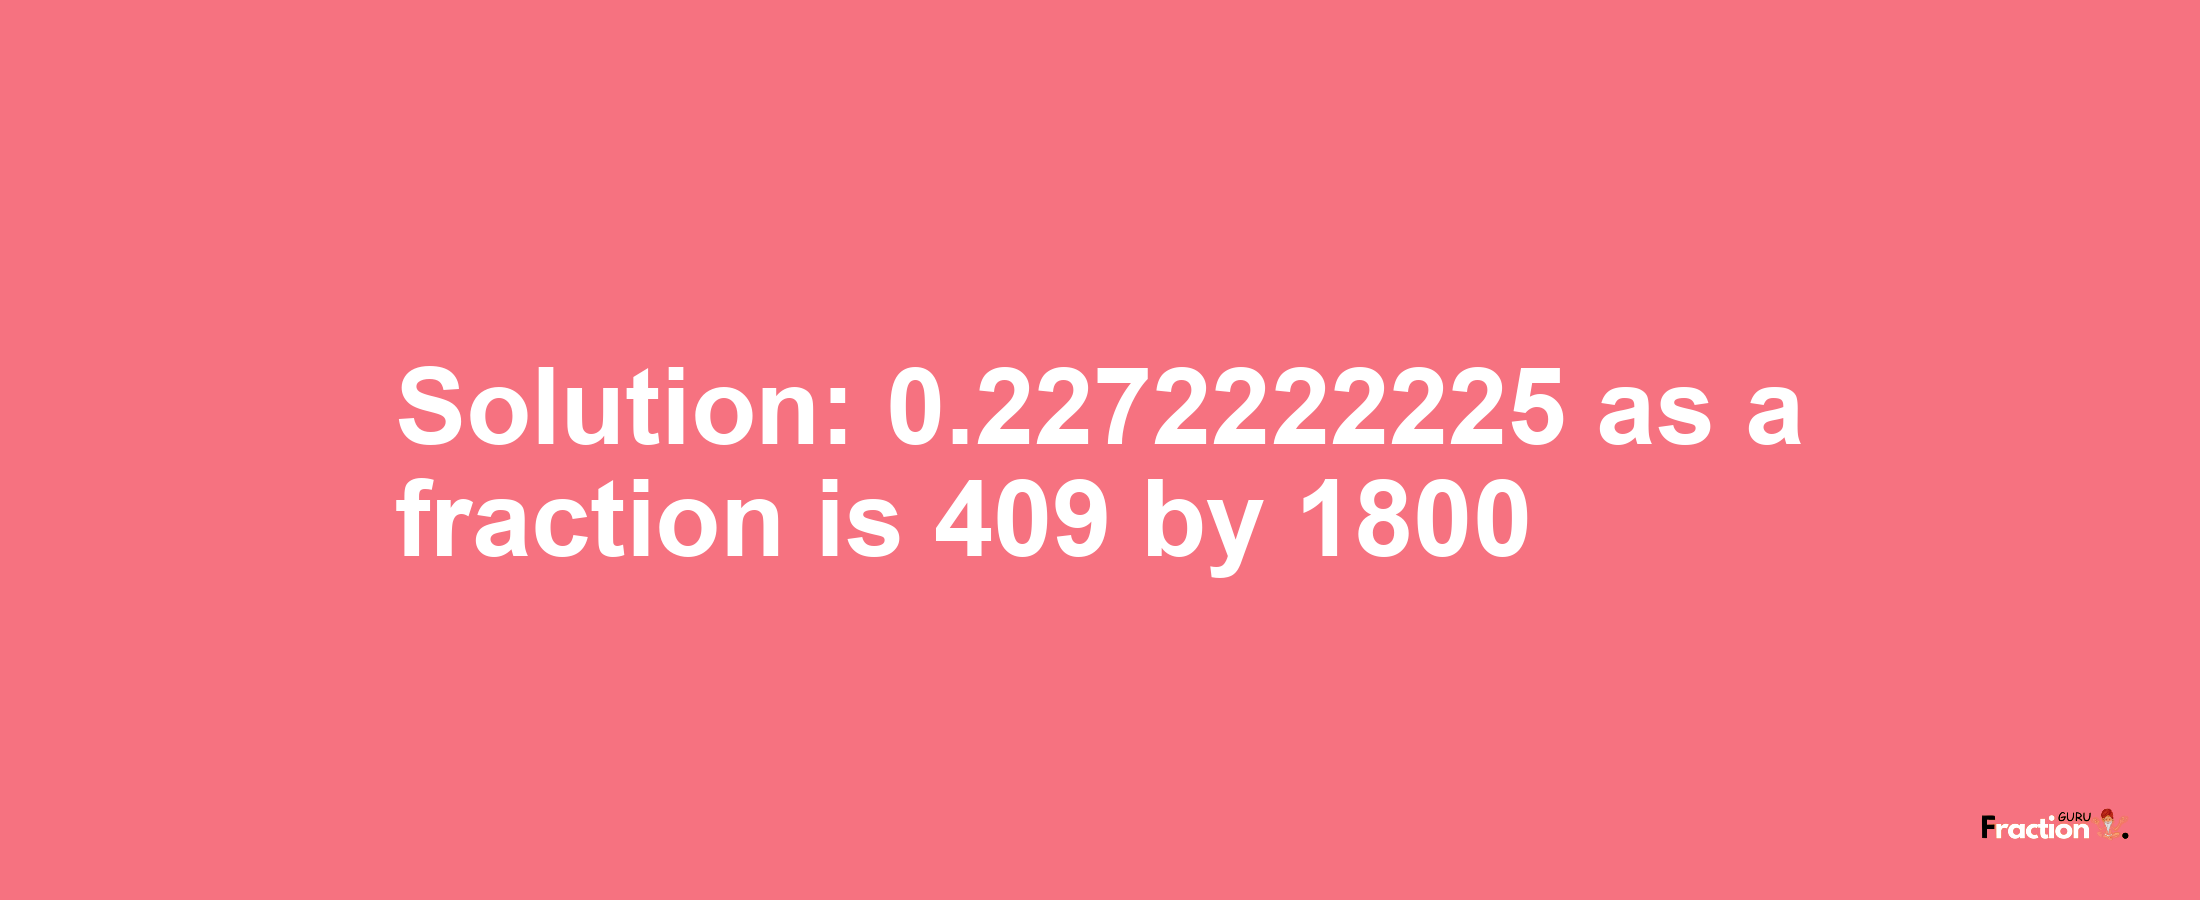 Solution:0.2272222225 as a fraction is 409/1800